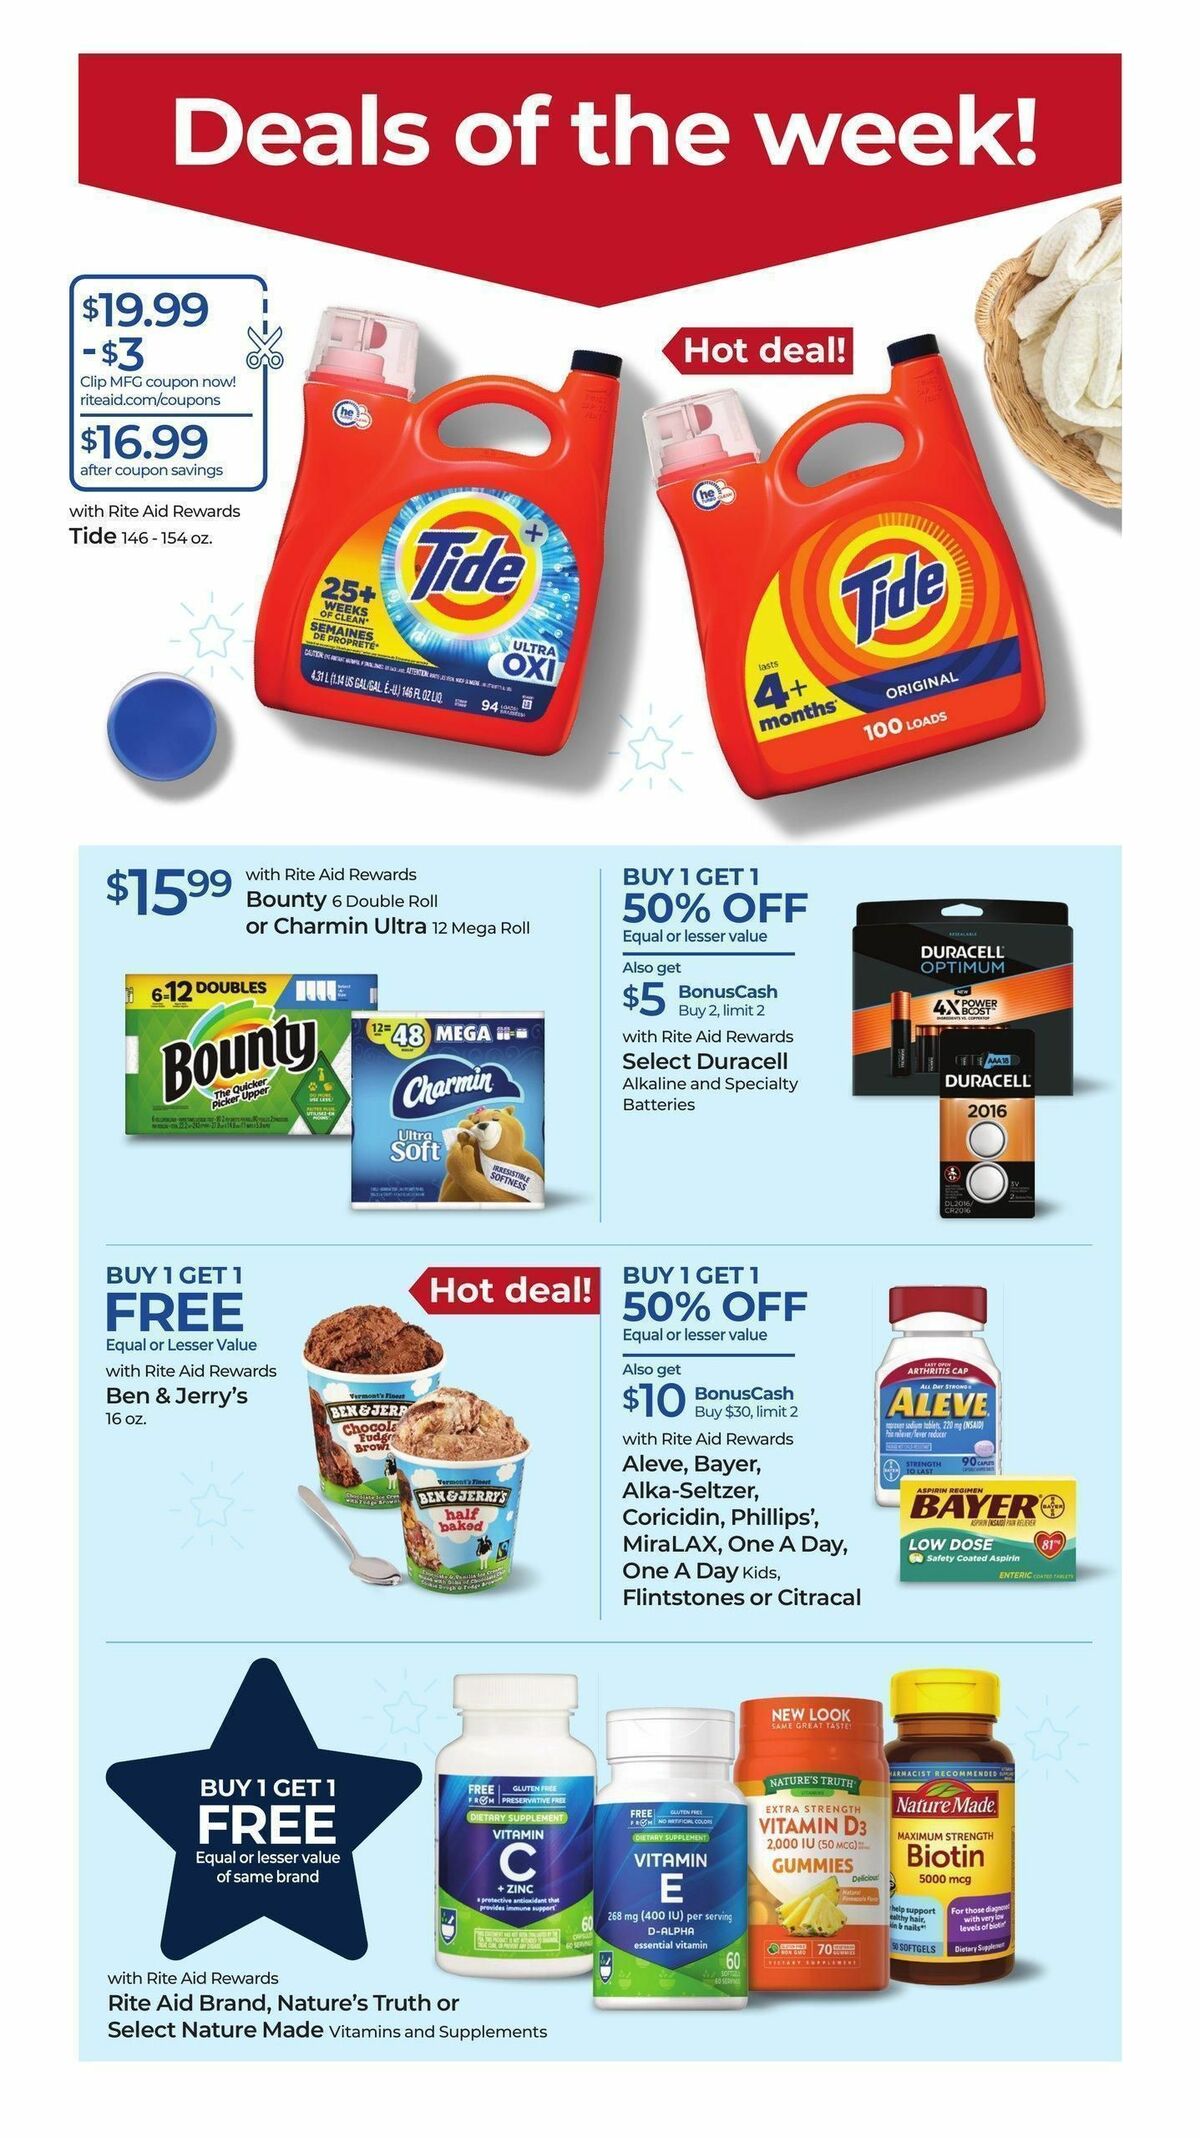 Rite Aid Weekly Ad from June 25